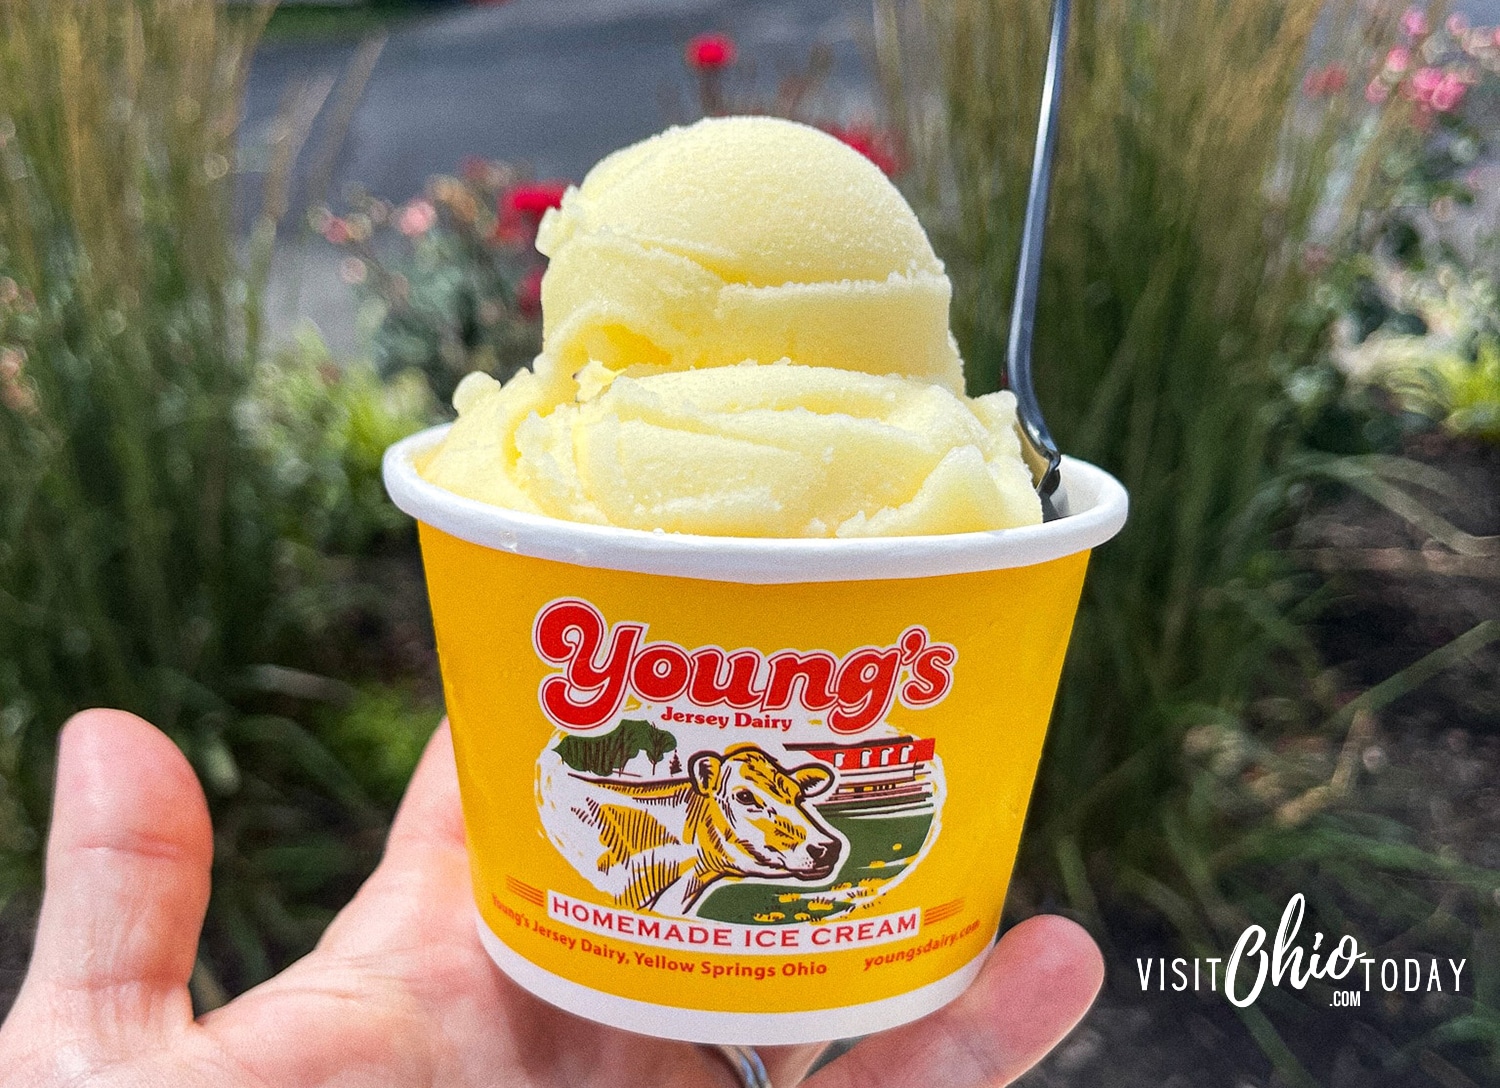 horizontal photo of a hand holding a yellow tub containing ice cream Photo credit: Cindy Gordon of VisitOhioToday.com